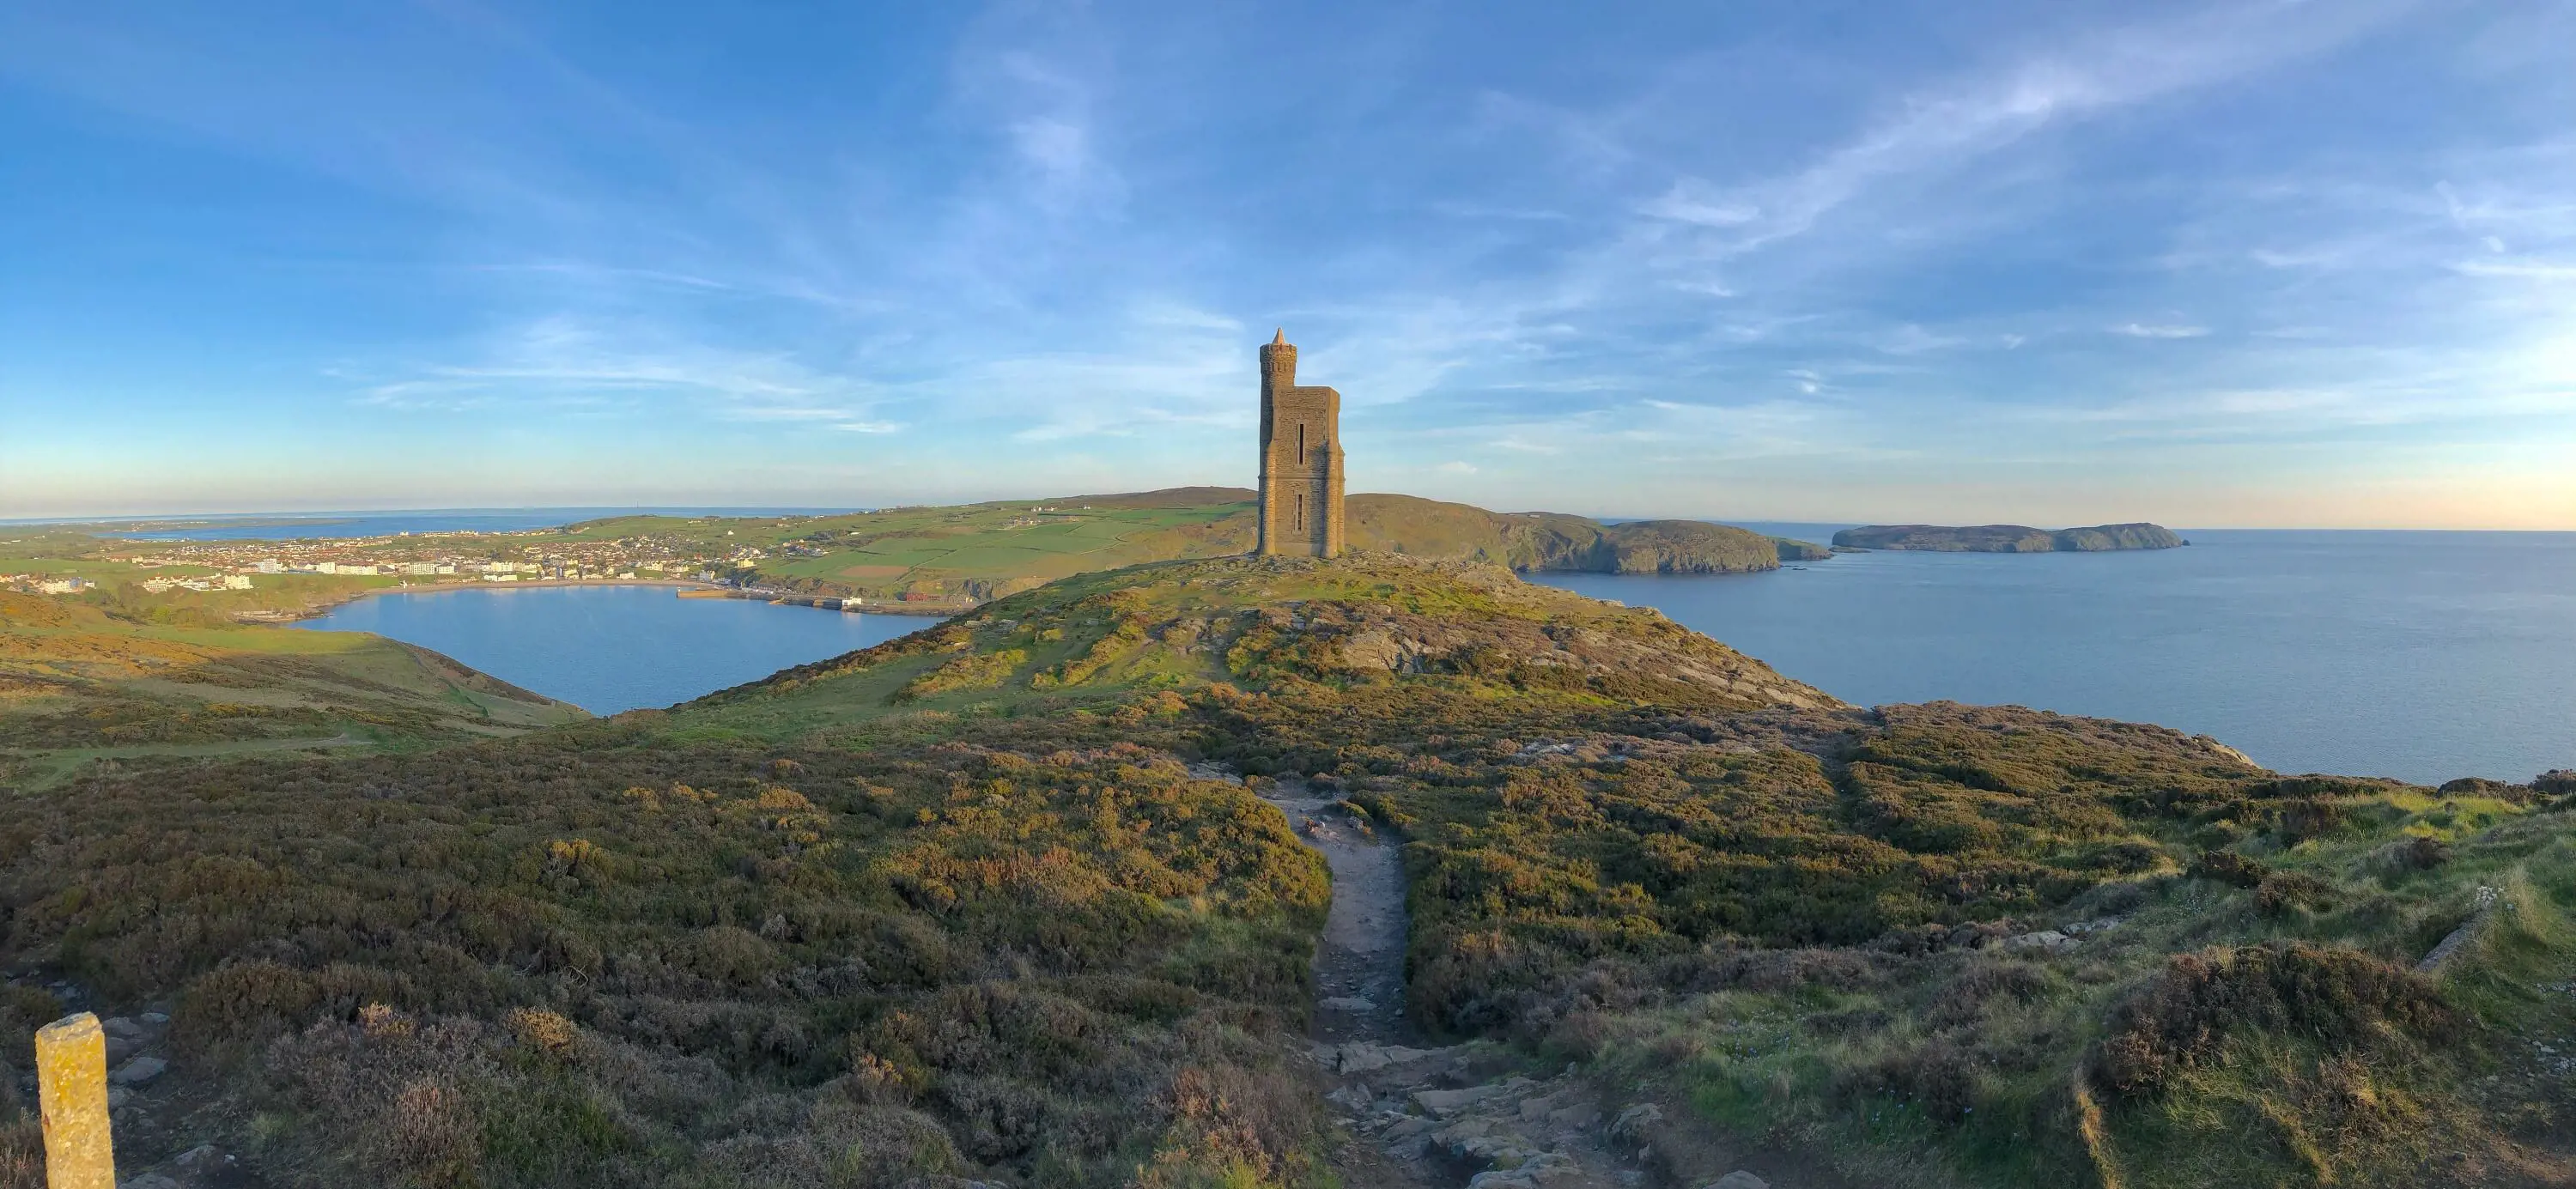 Isle of Man - Milner's Tower, Bradda to Port Erin and the Calf of Man